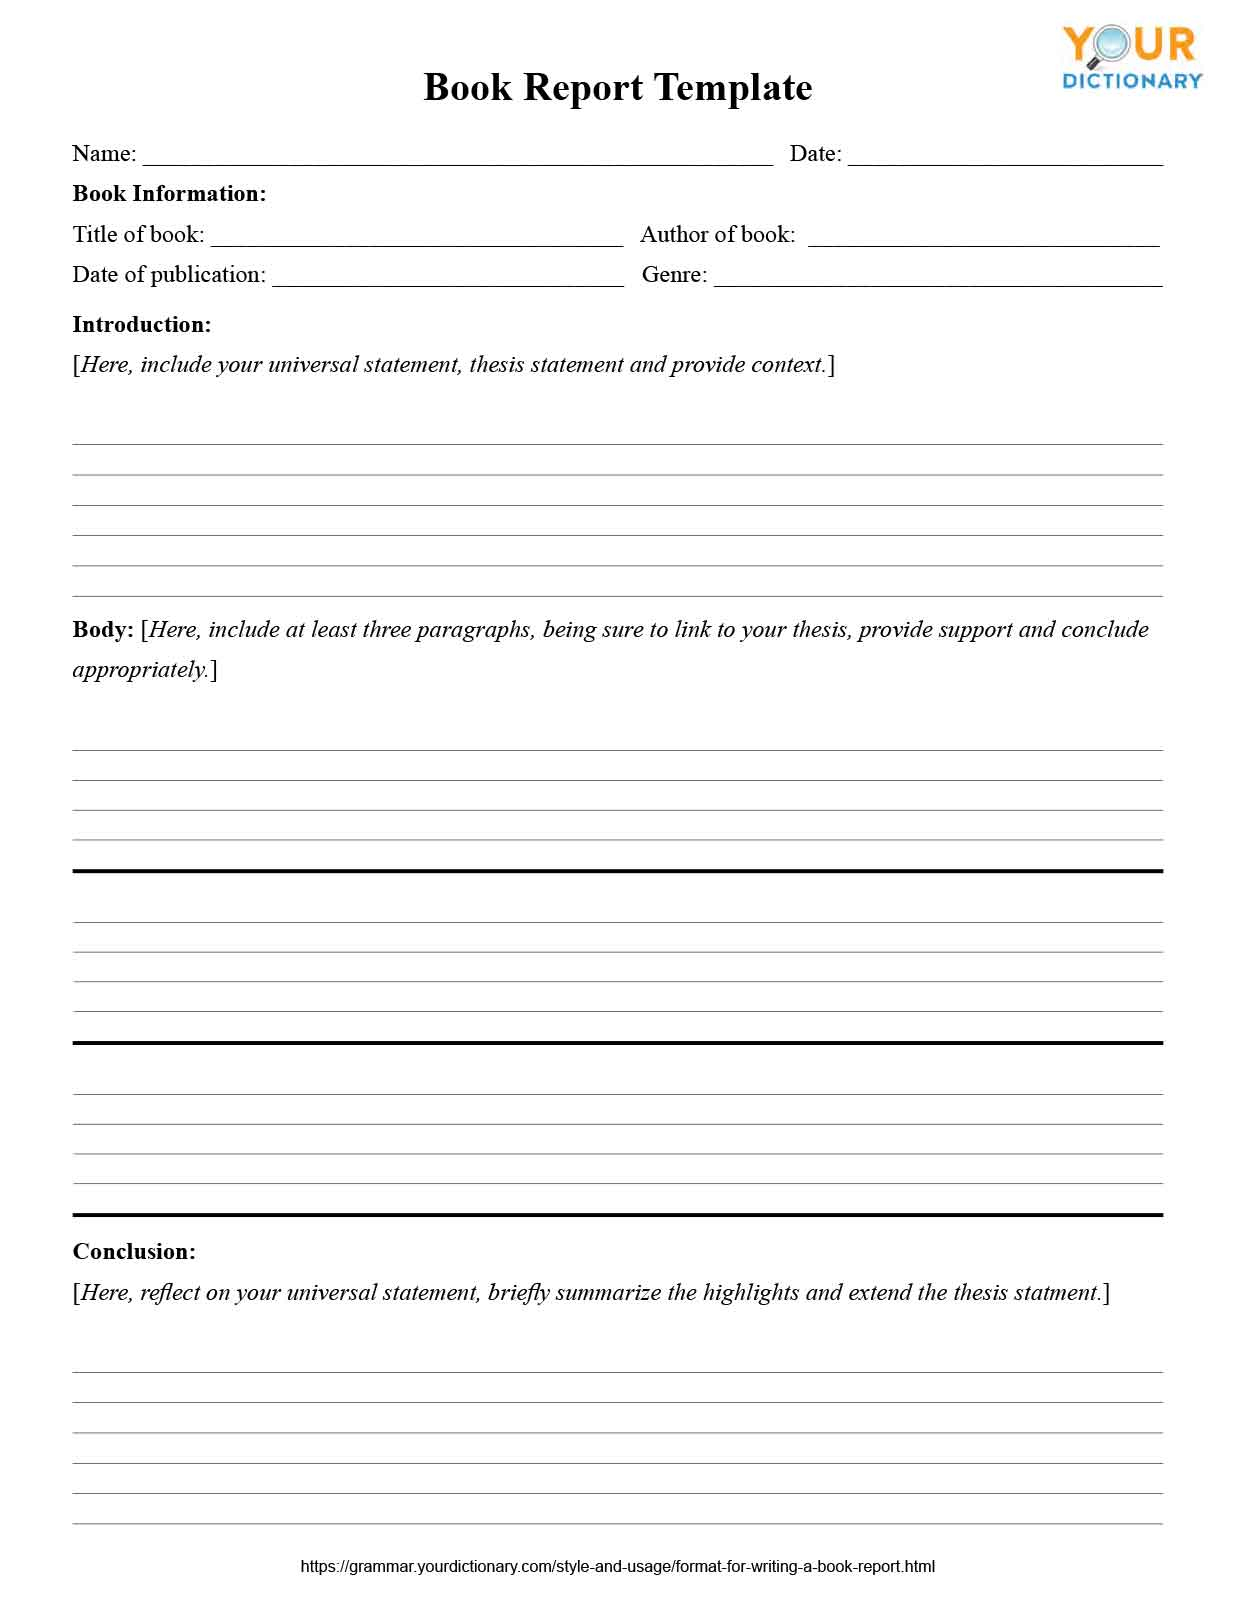 Format for Writing a Book Report Inside Book Report Template Middle School